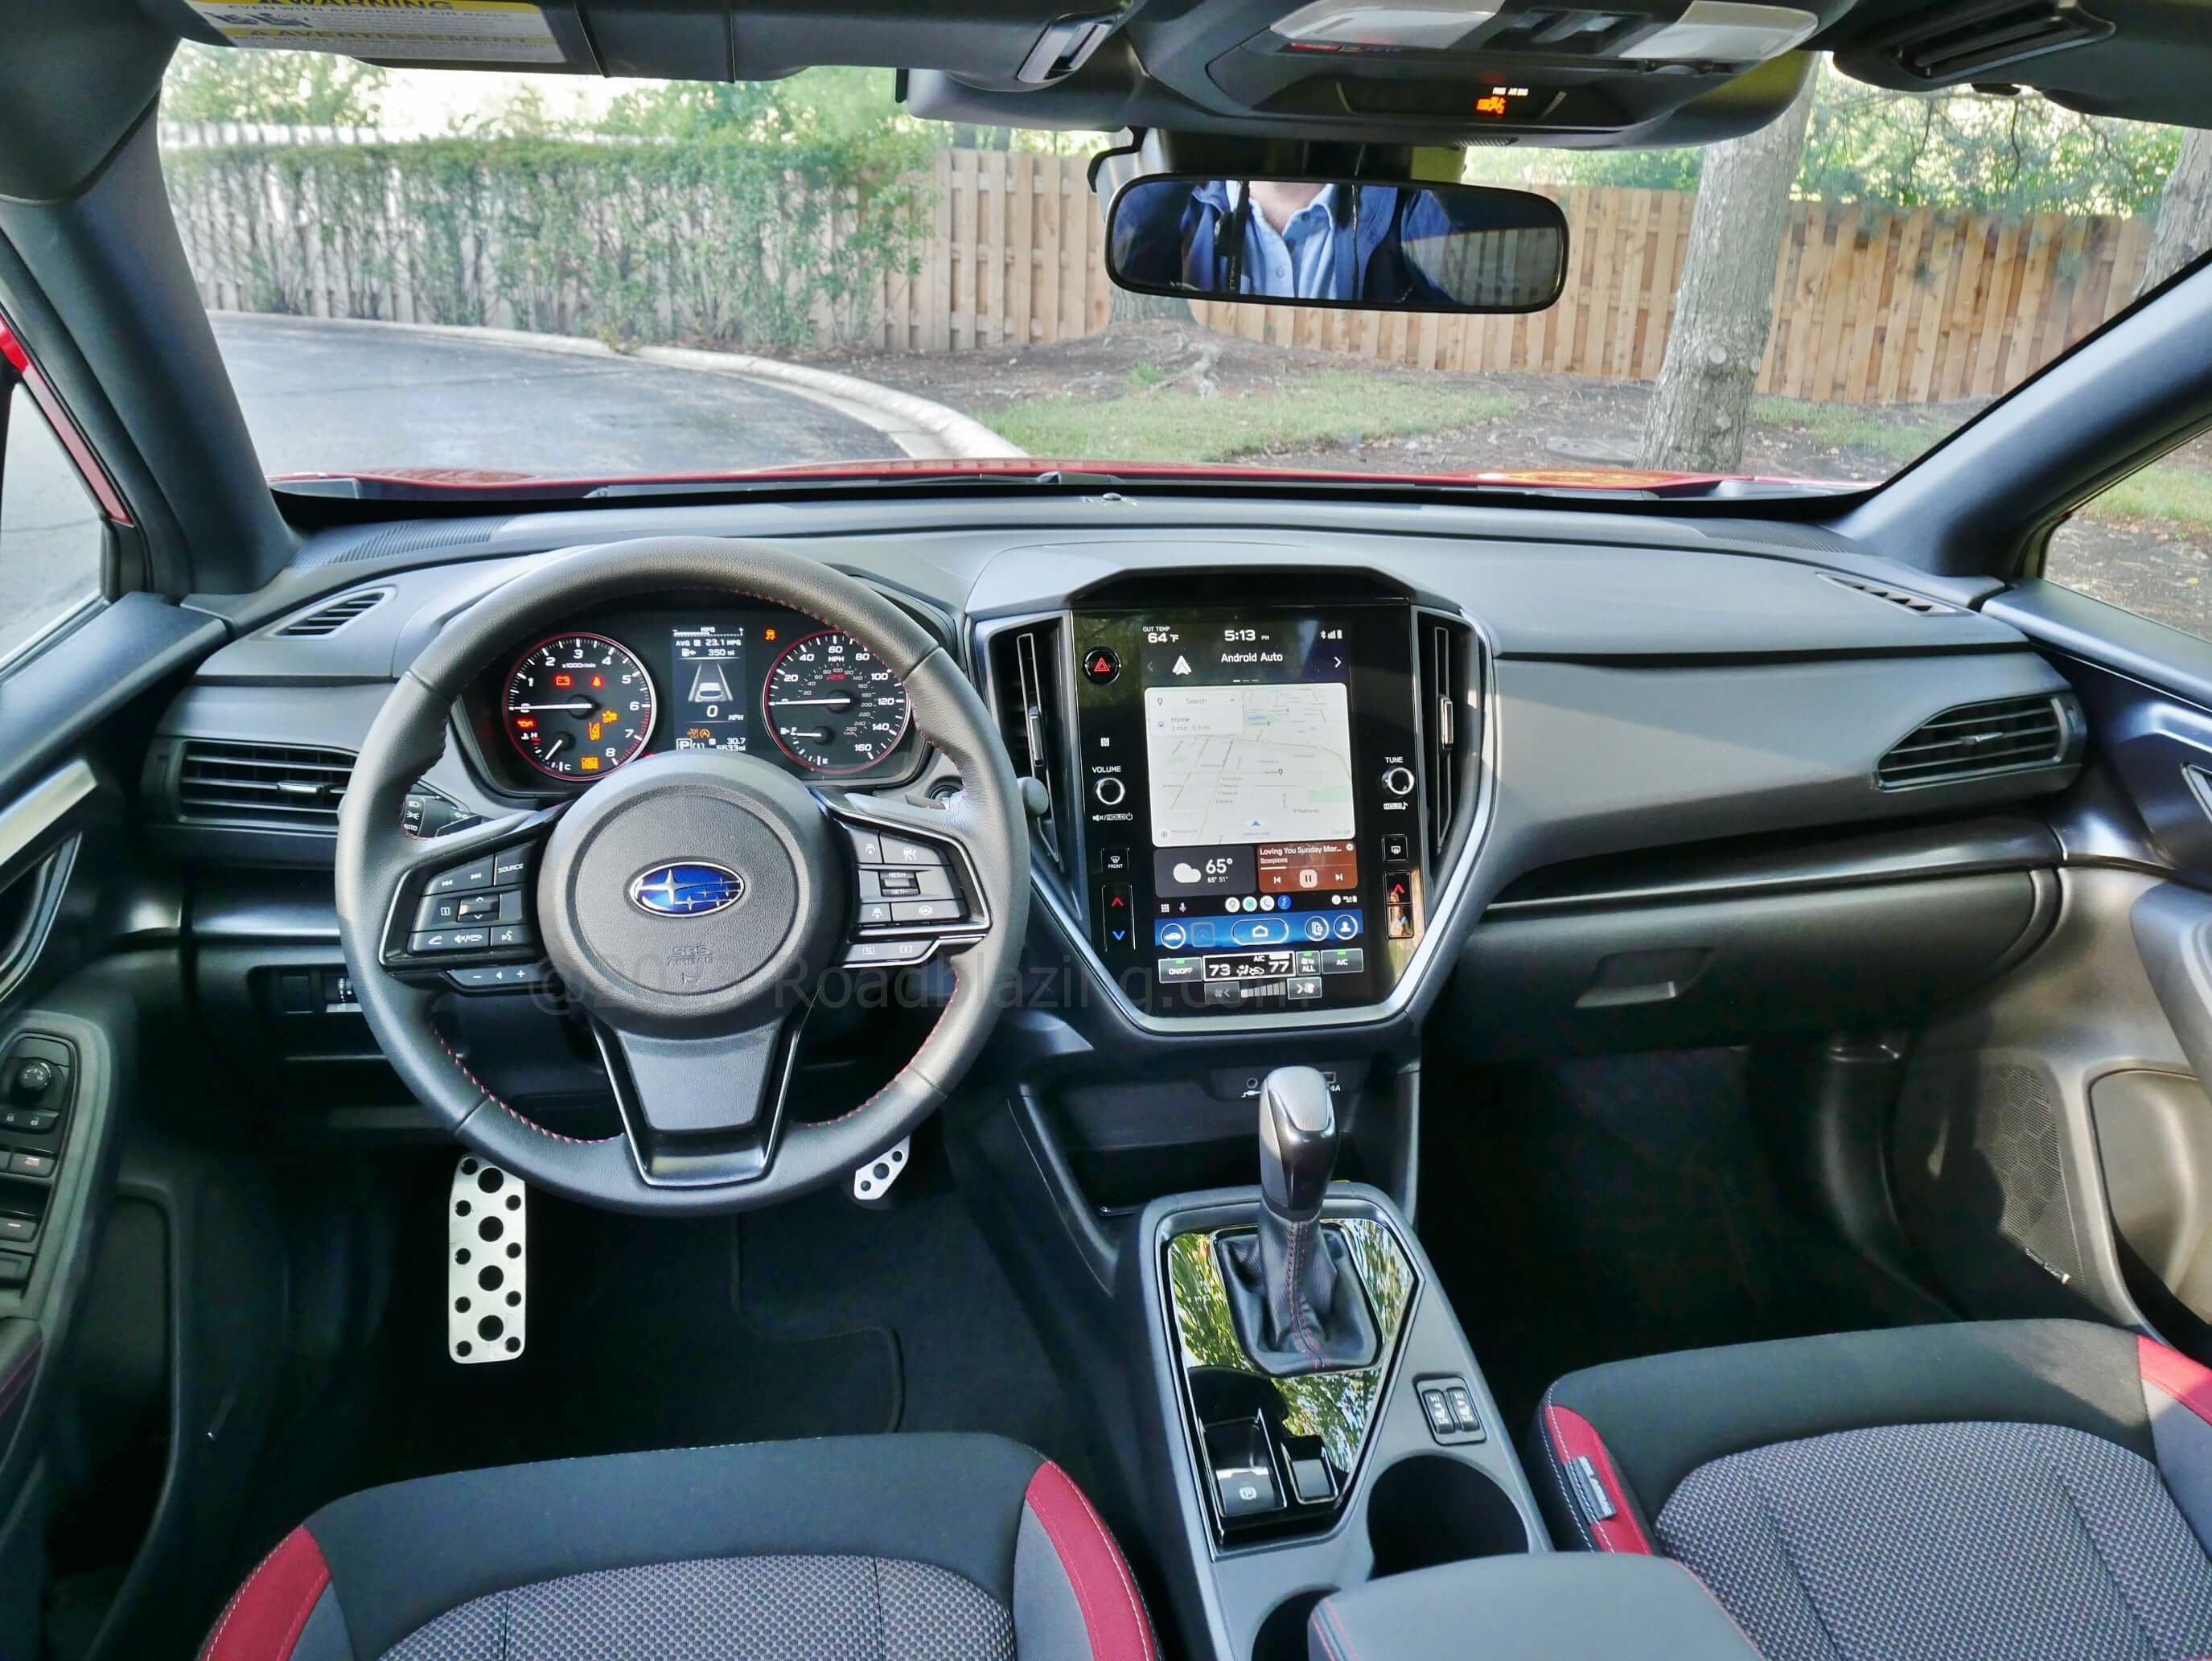 2023 Subaru Impreza RS: cockpit w/ traditional analog instruments, abundant gloss black accents, low cowl for excellent outward view